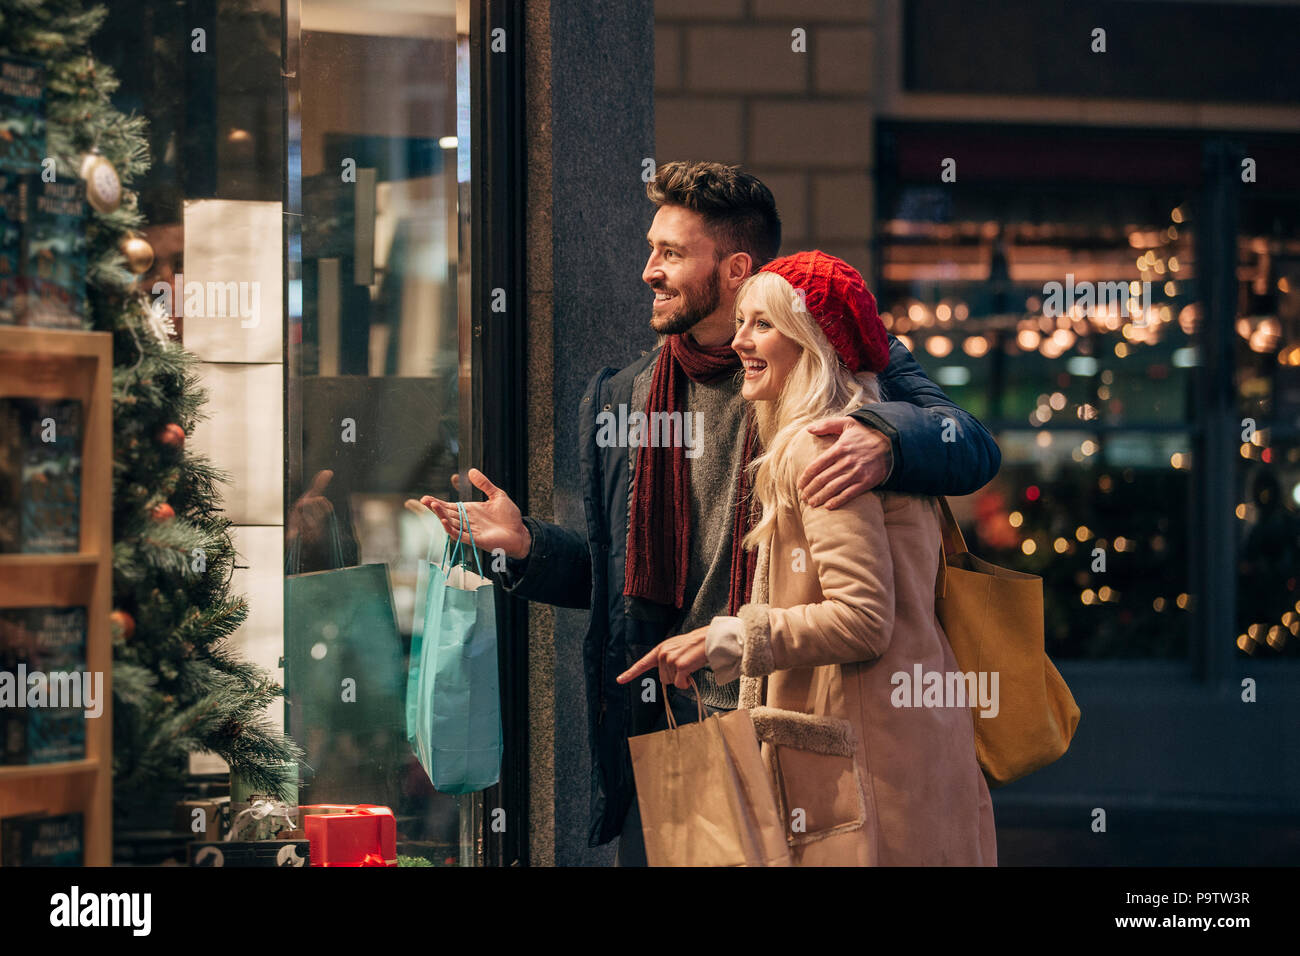 Side view of a couple doing some window shopping at christmas. The mid adult male has his arm around the mid adult female and they are talking about w Stock Photo